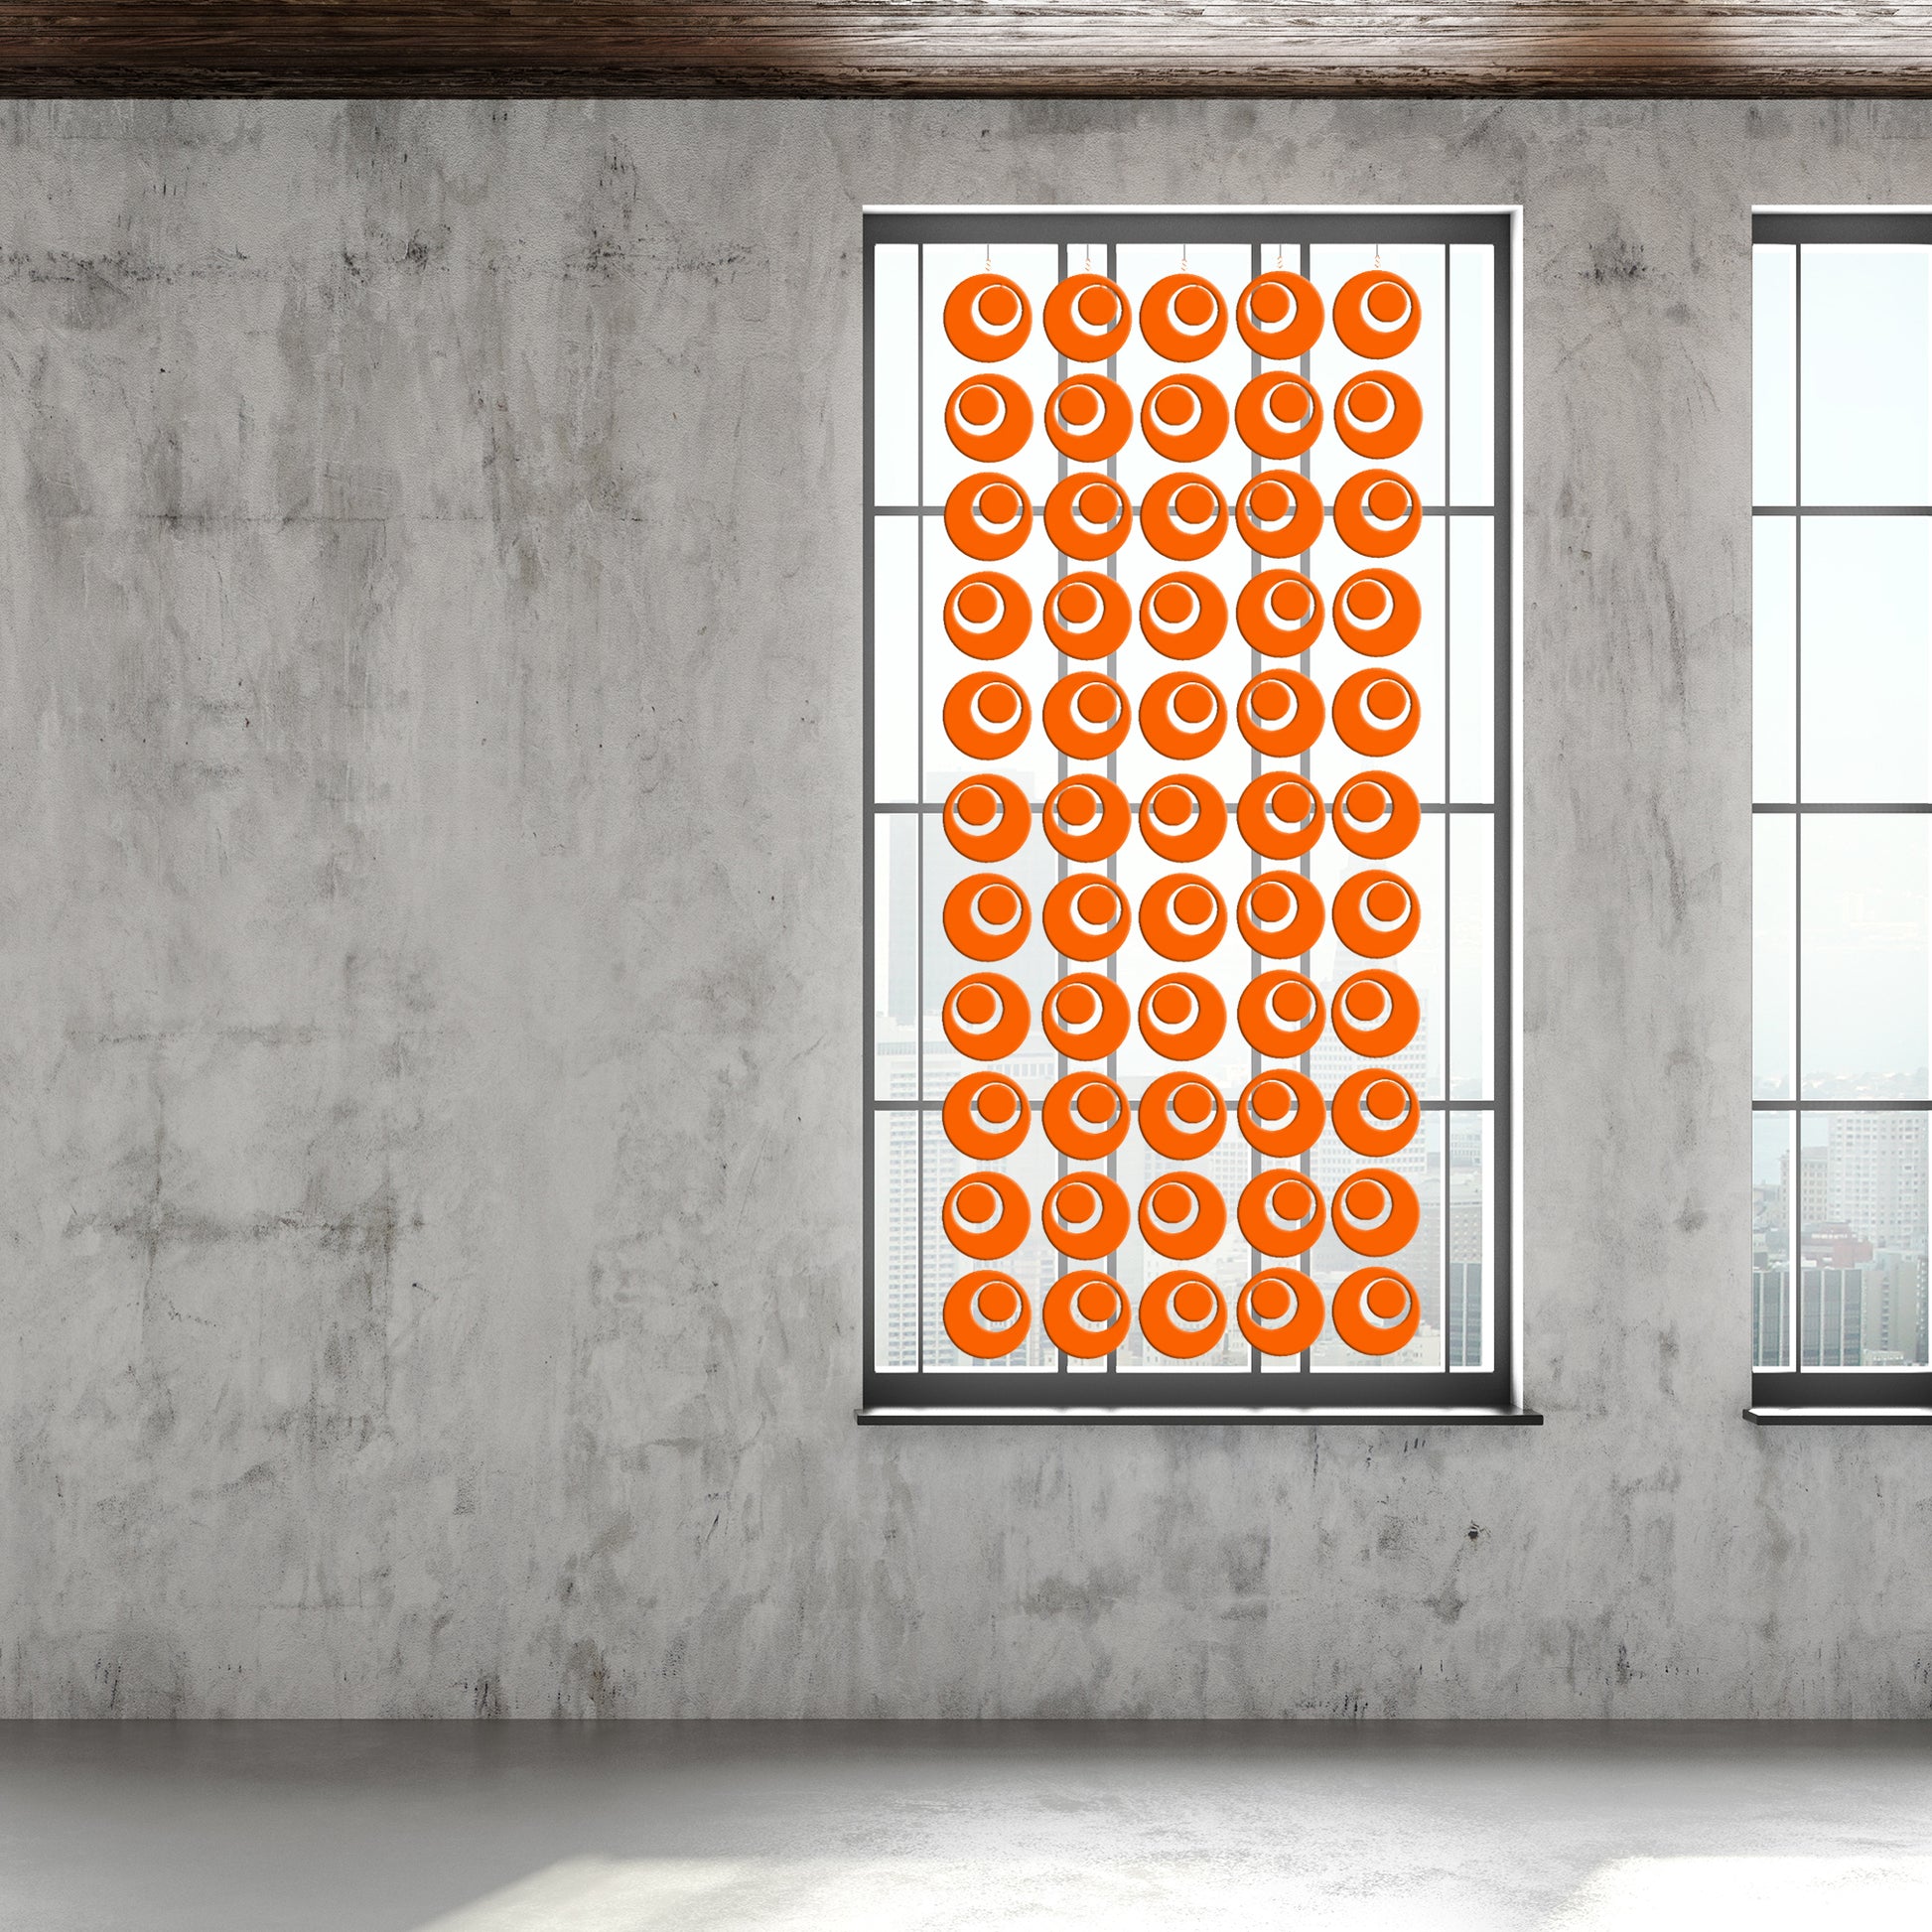 Groovy Acrylic Orange Window Curtain DIY KIT in modern city building with concrete walls and wood ceiling by AtomicMobiles.com